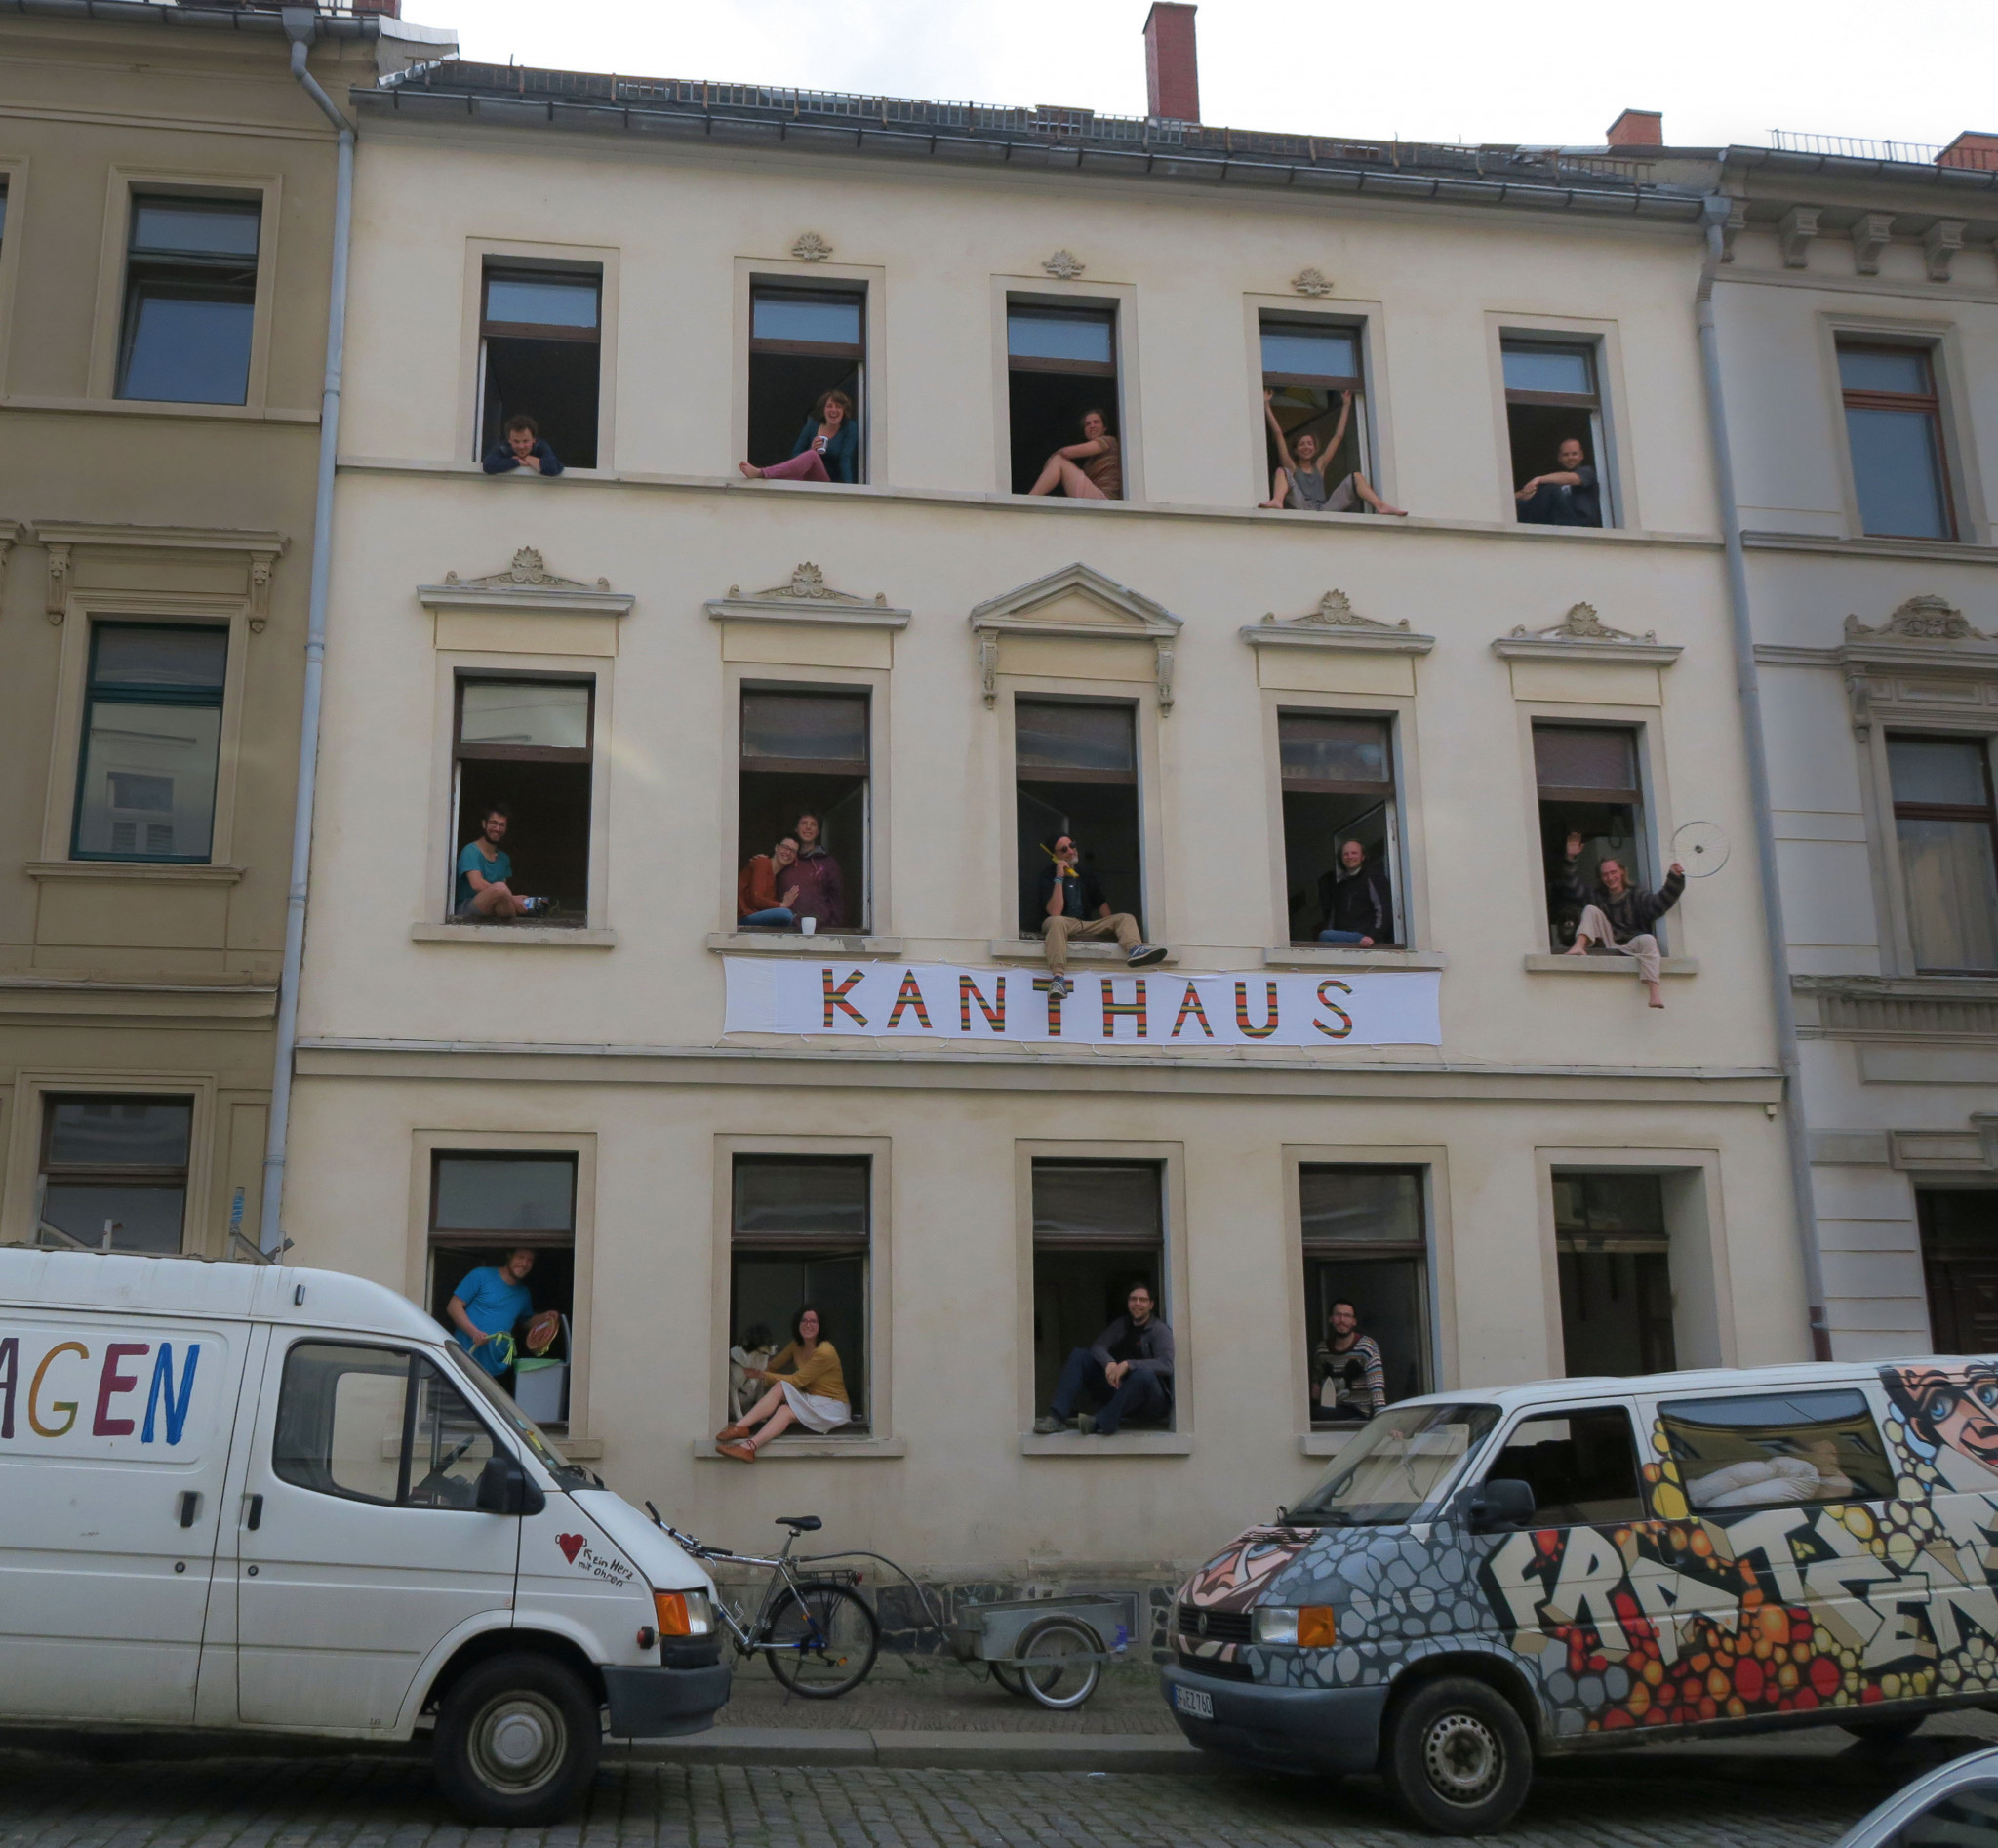 A street-view of an old building with happy people waving out of the windows.